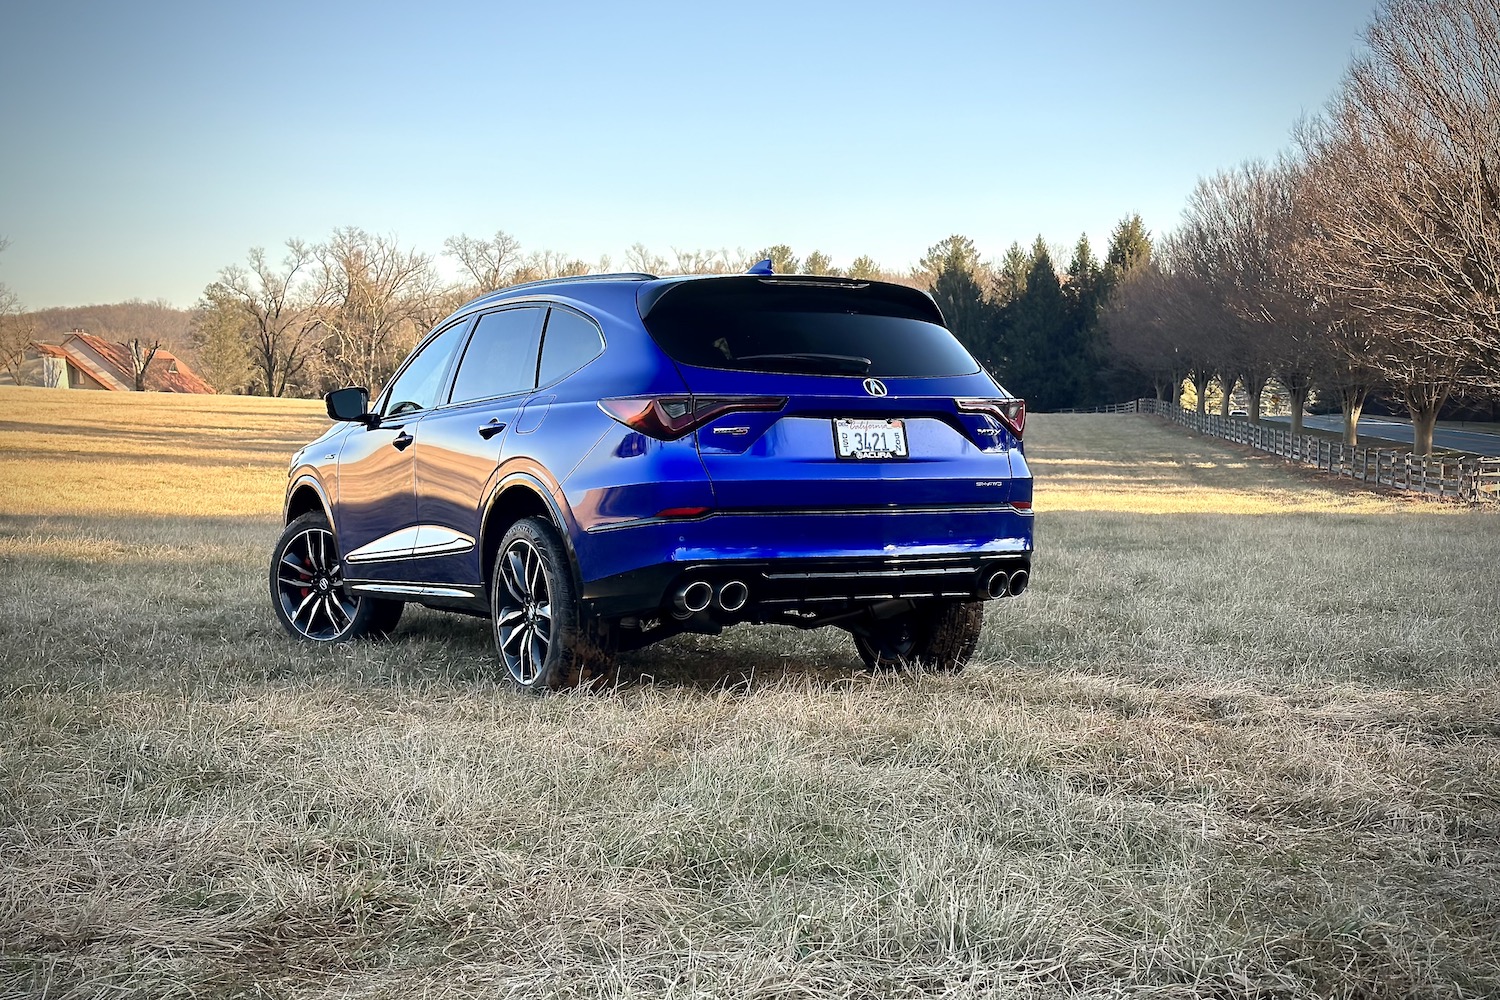 2022 Acura MDX Type S rear end angle from the driver's side parked in a field with trees in the back.